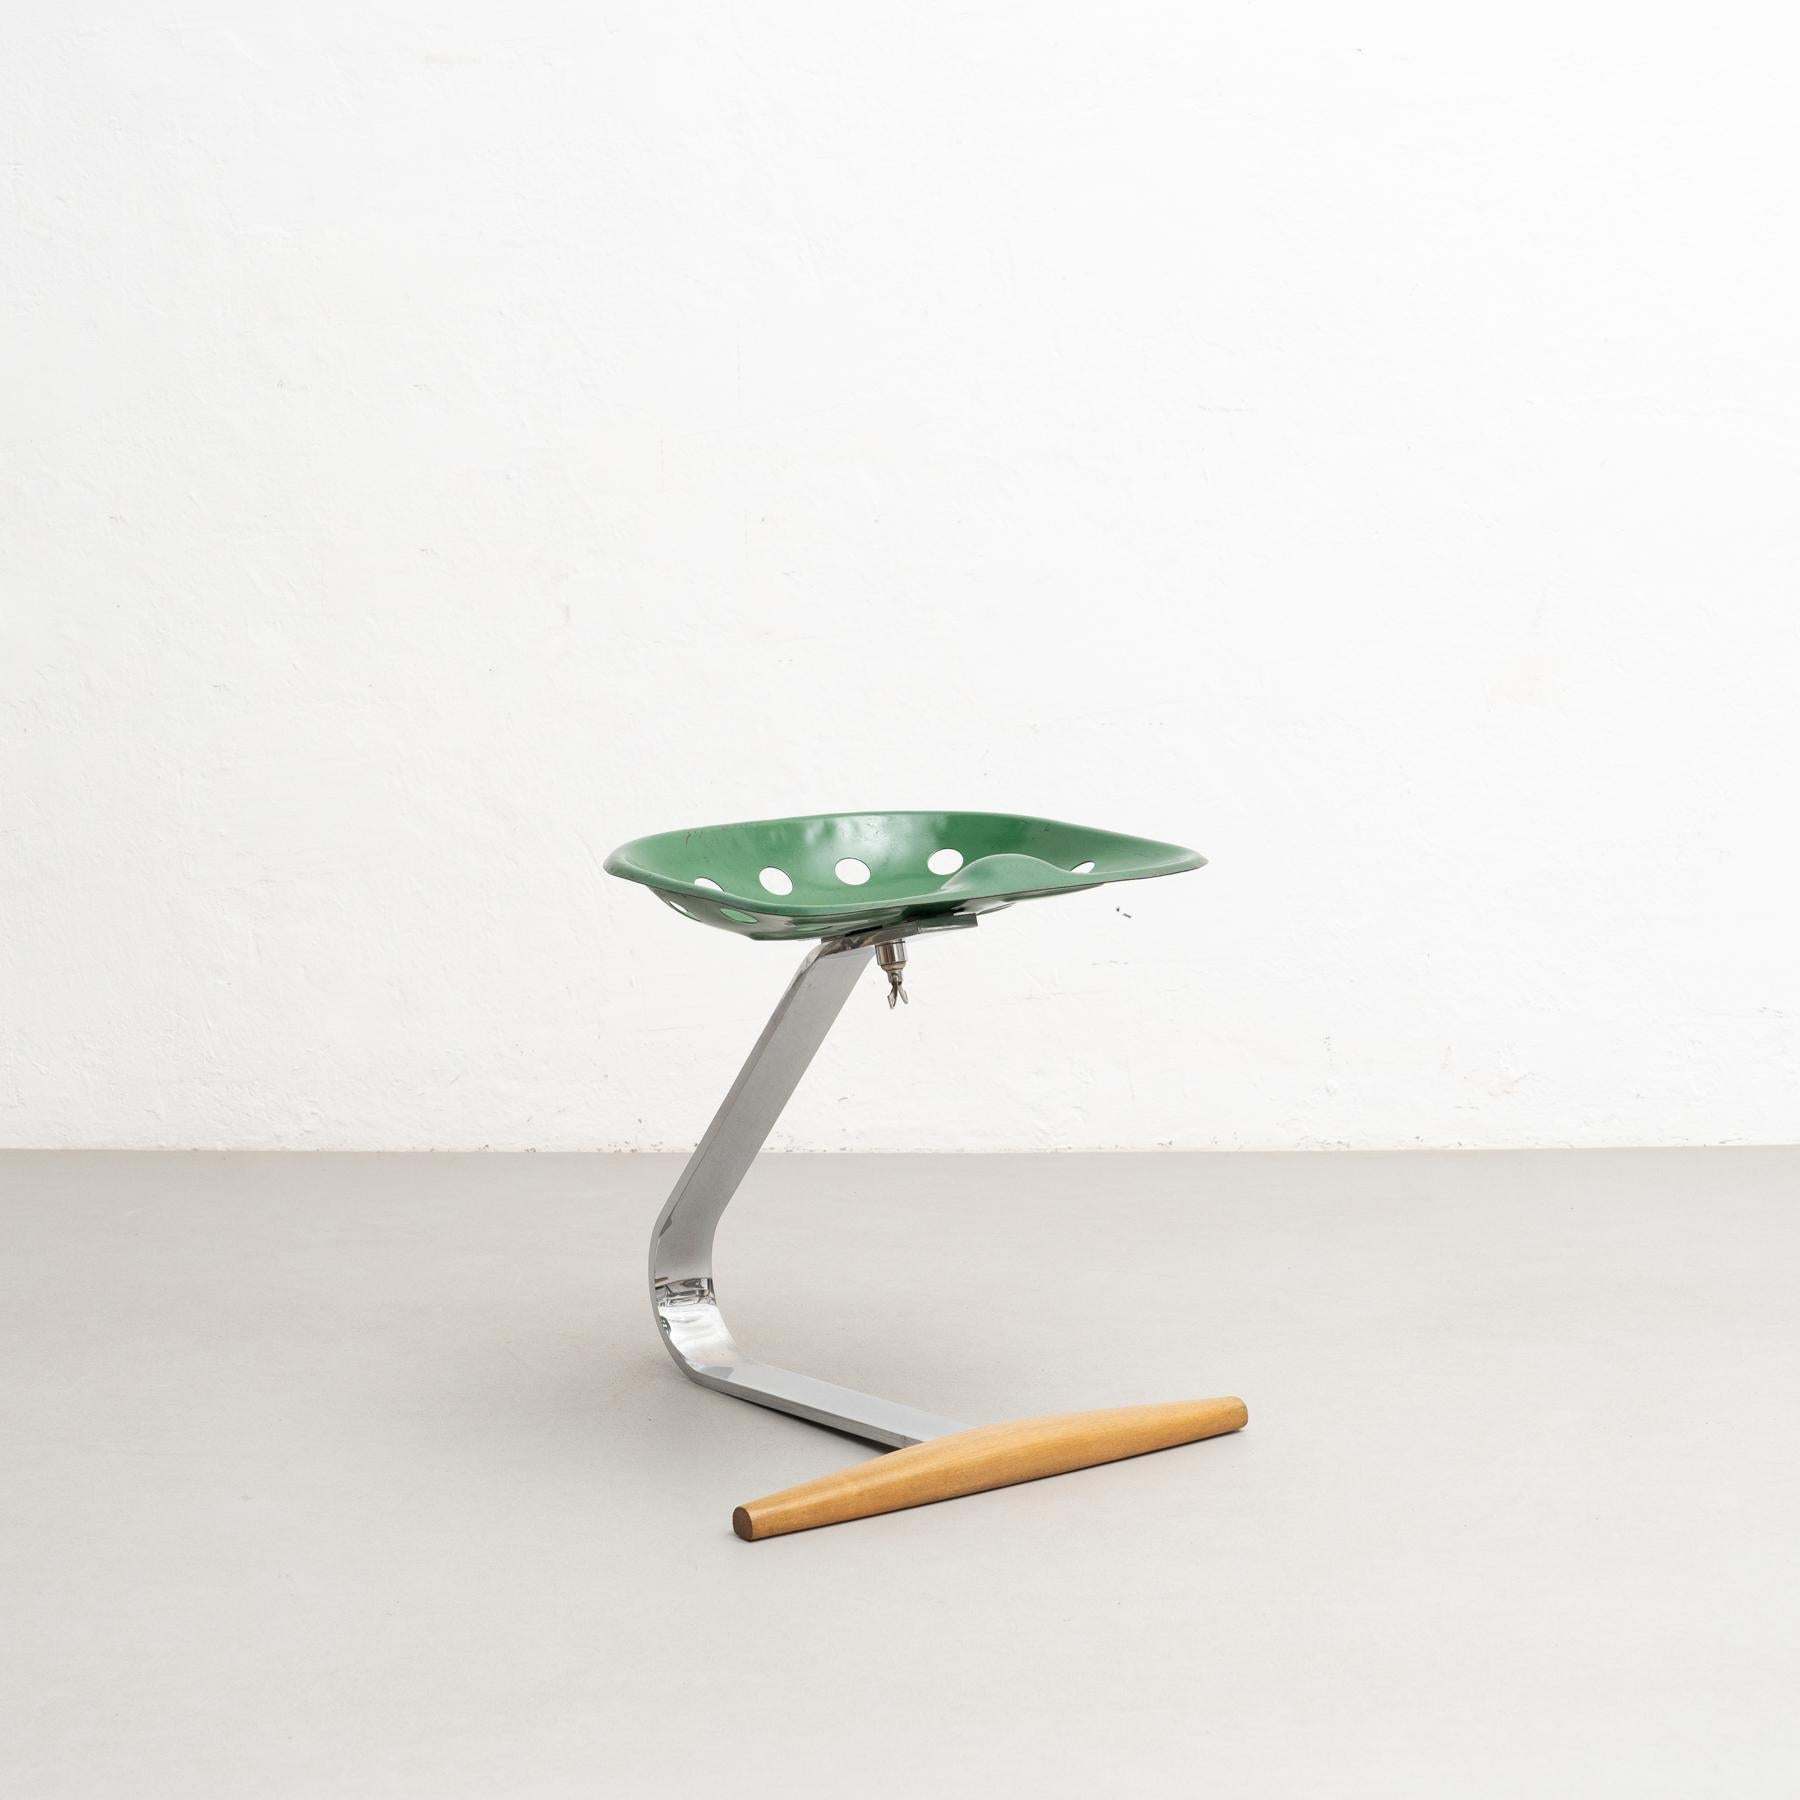 Mezzadro stool designed by Achille and Giacomo Castiglioni. 

Manufactured by Zanotta in Italy, circa 1960.

Acting out of both practical and intellectual motives, Achille and Pier Giacomo Castiglioni designed the Mezzadro Stool by bolting a